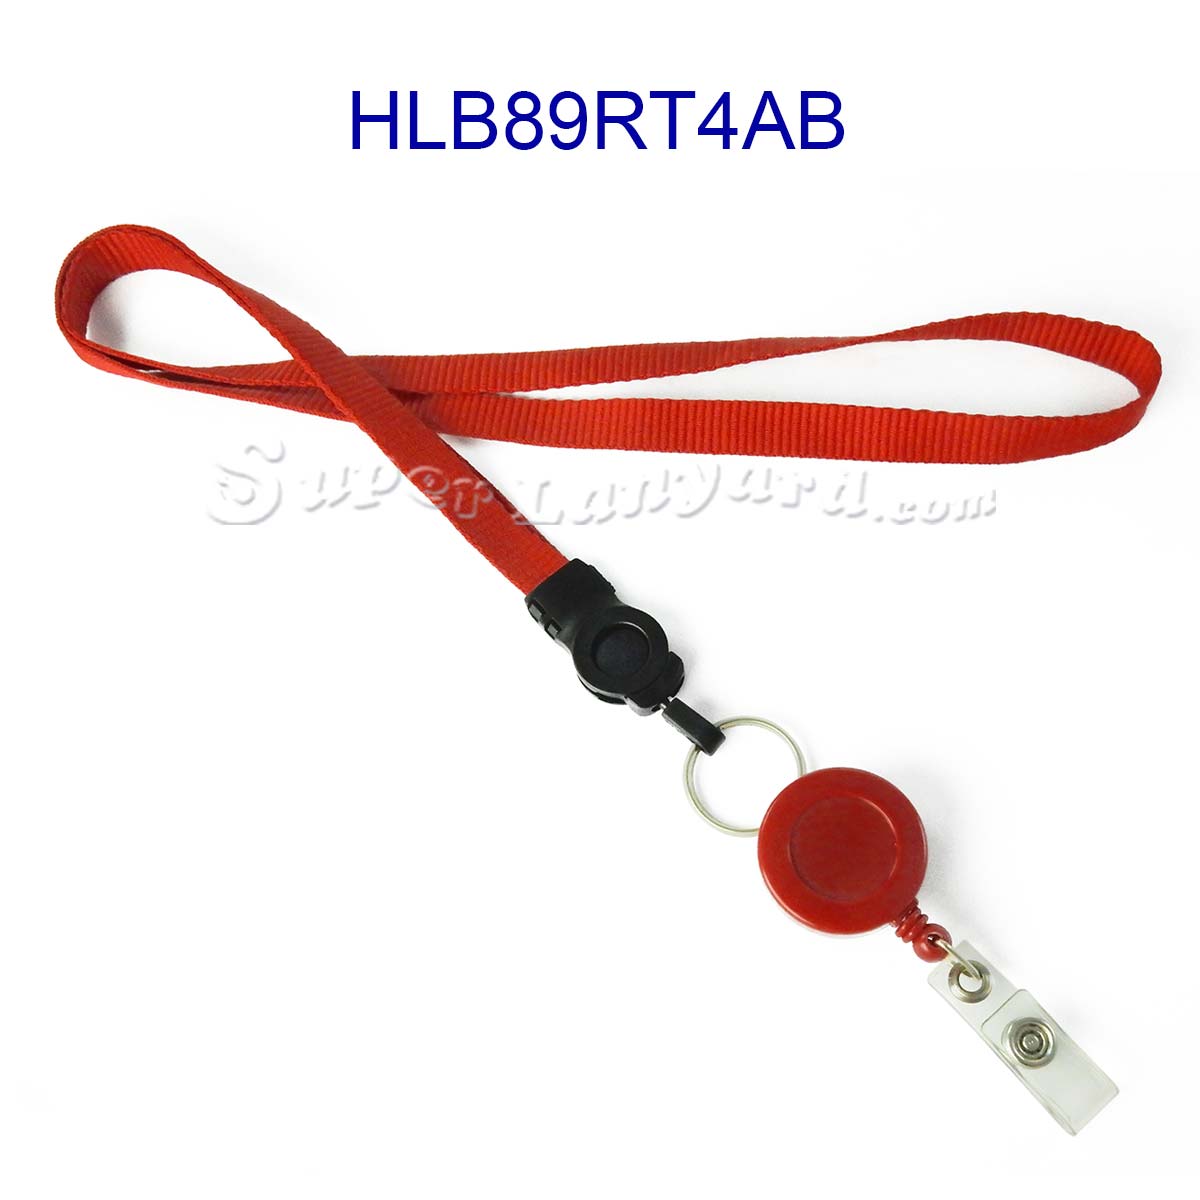 Retractable Badge Holder Lanyard  12mm safety release buckle lanyard  attached keyring with ID badge reel and horizontal 4x3 badge holder -HLB89RT4AB